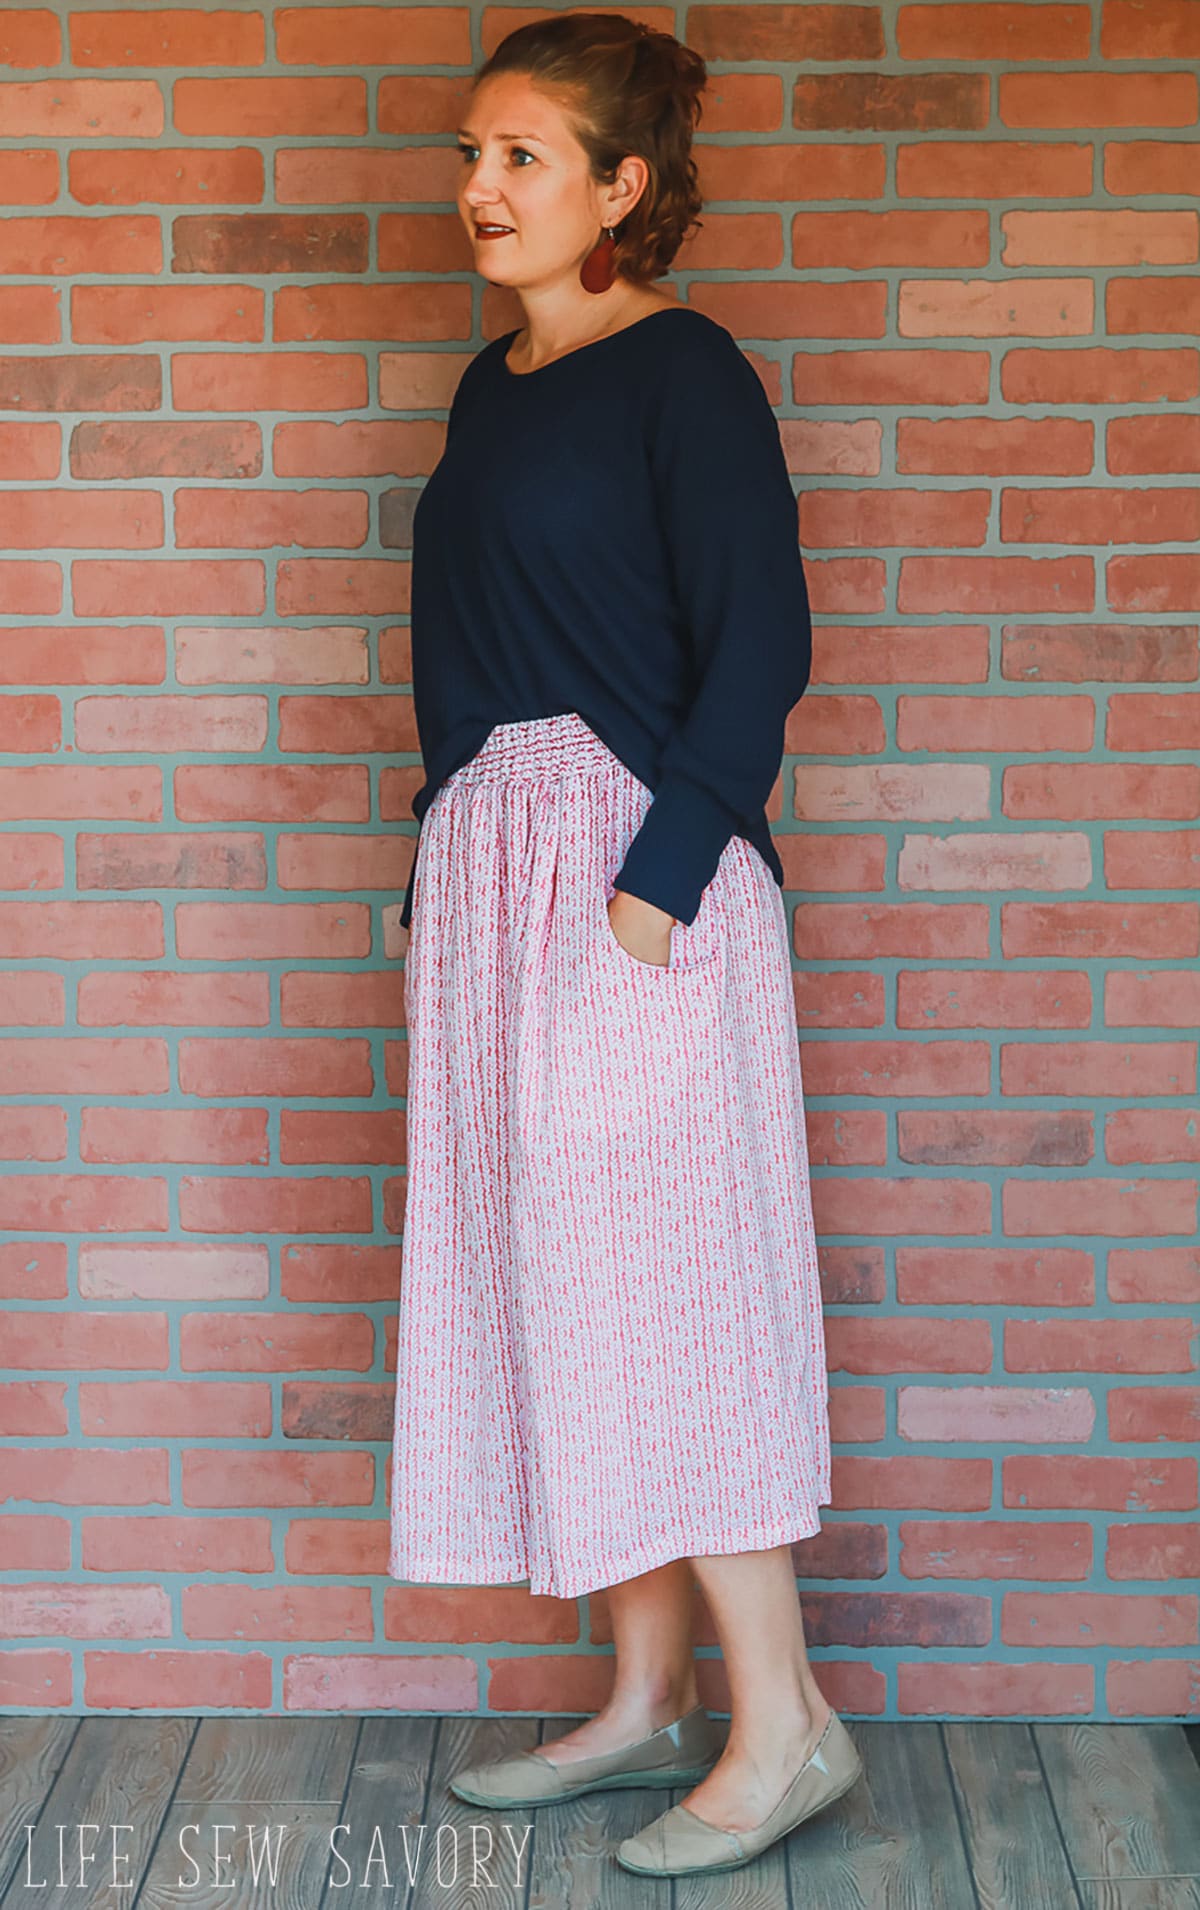 Best Womens Skirt Patterns - Free and Paid - Life Sew Savory